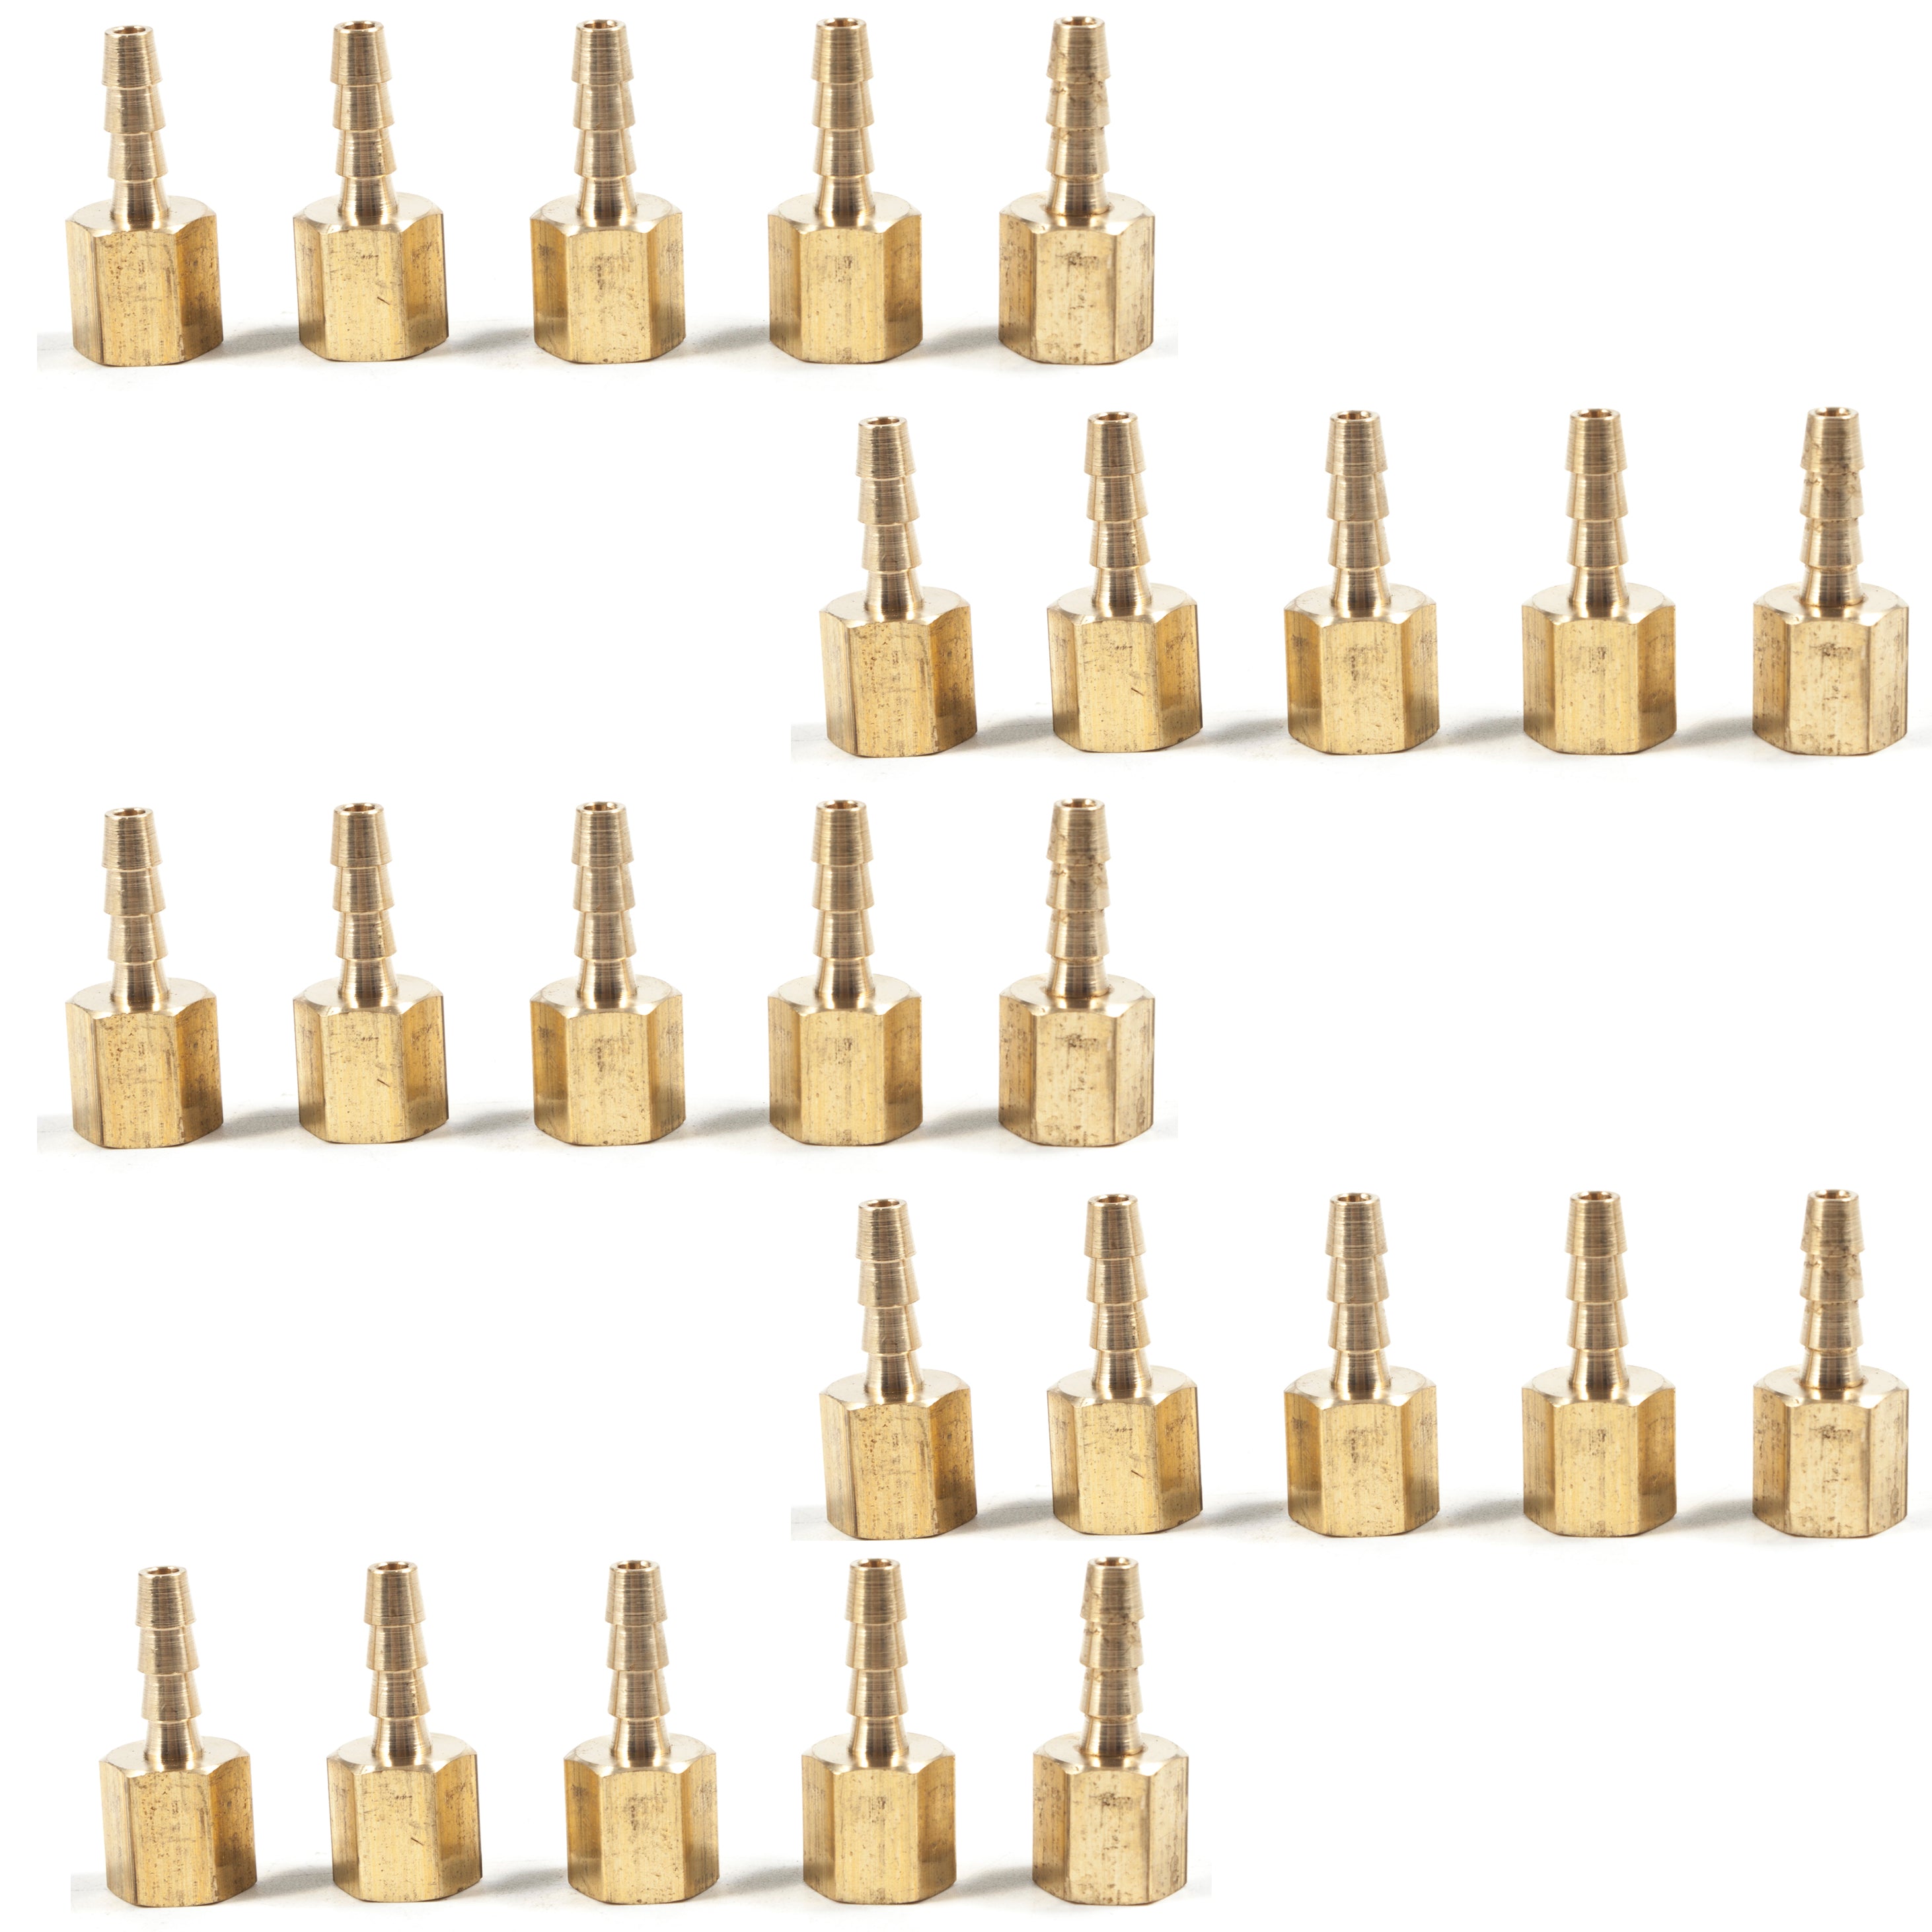 LTWFITTING Brass Fitting Coupler 3/16-Inch Hose Barb x 1/8-Inch Female NPT Fuel Gas Water(Pack of 25)